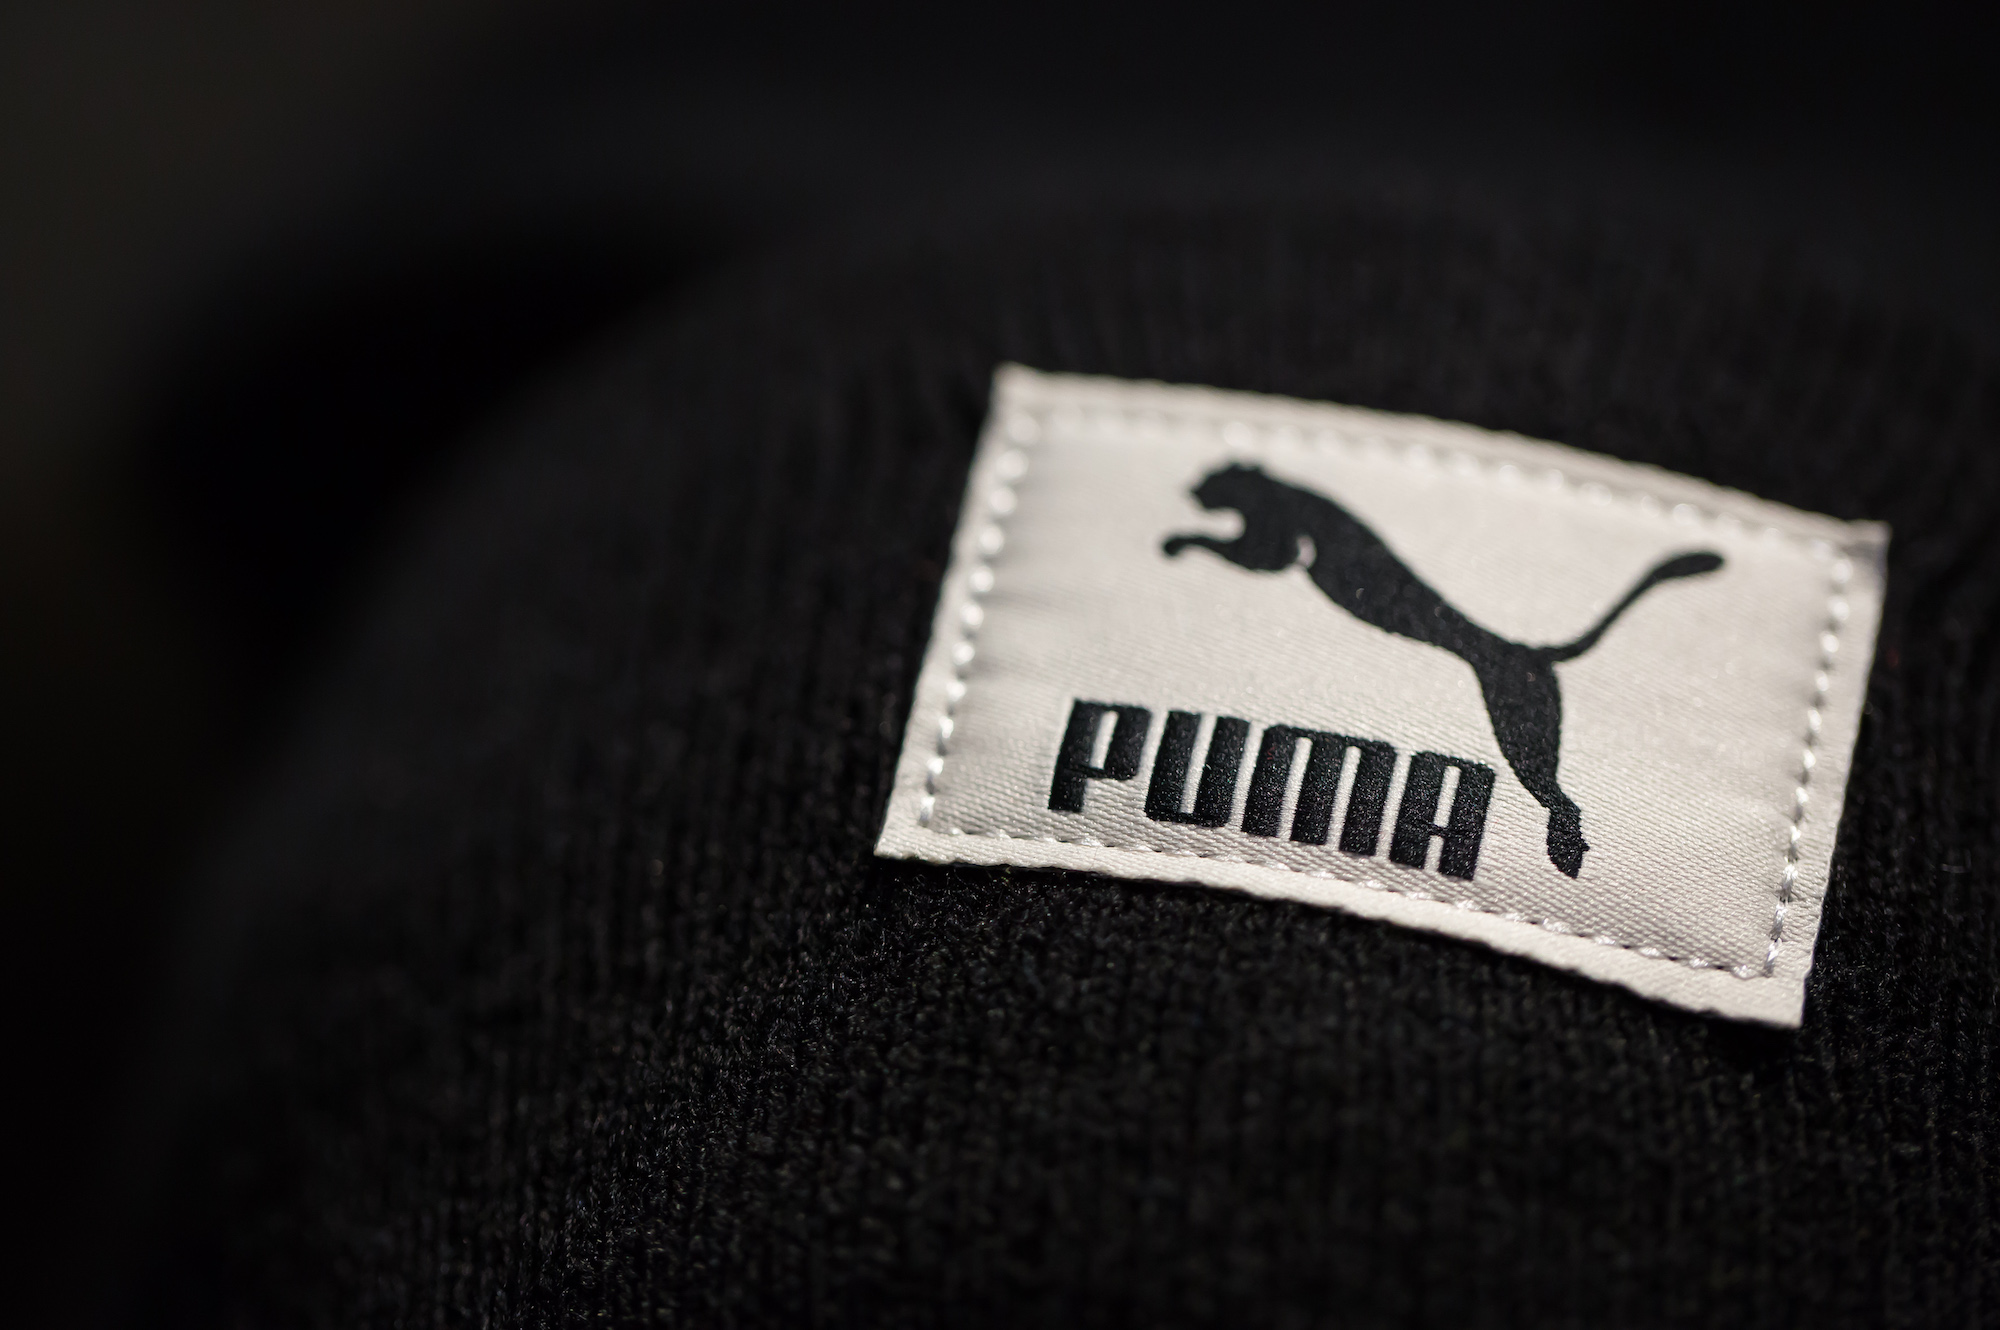 Kering Pares Back Its Puma Shares to Focus on Luxury Goods - Bloomberg